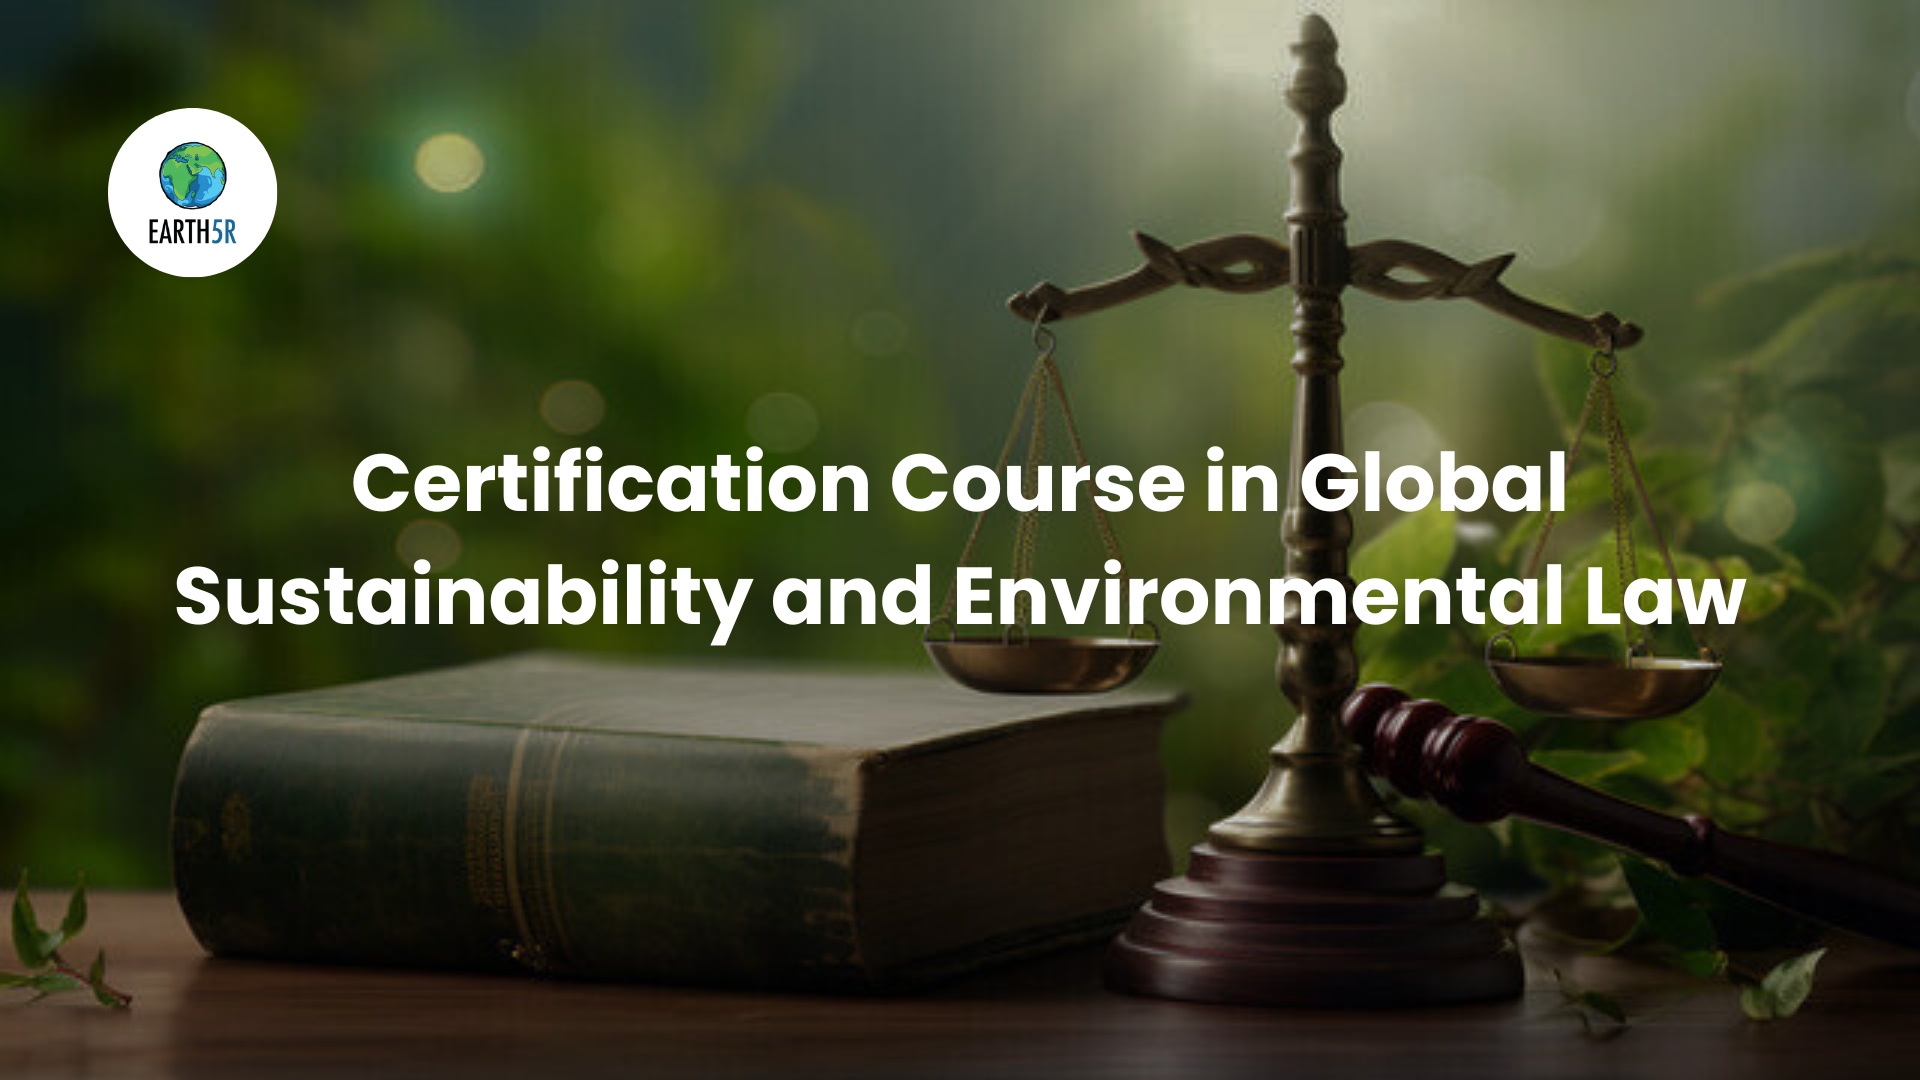 Certification Course in Global Sustainability and Environmental Law